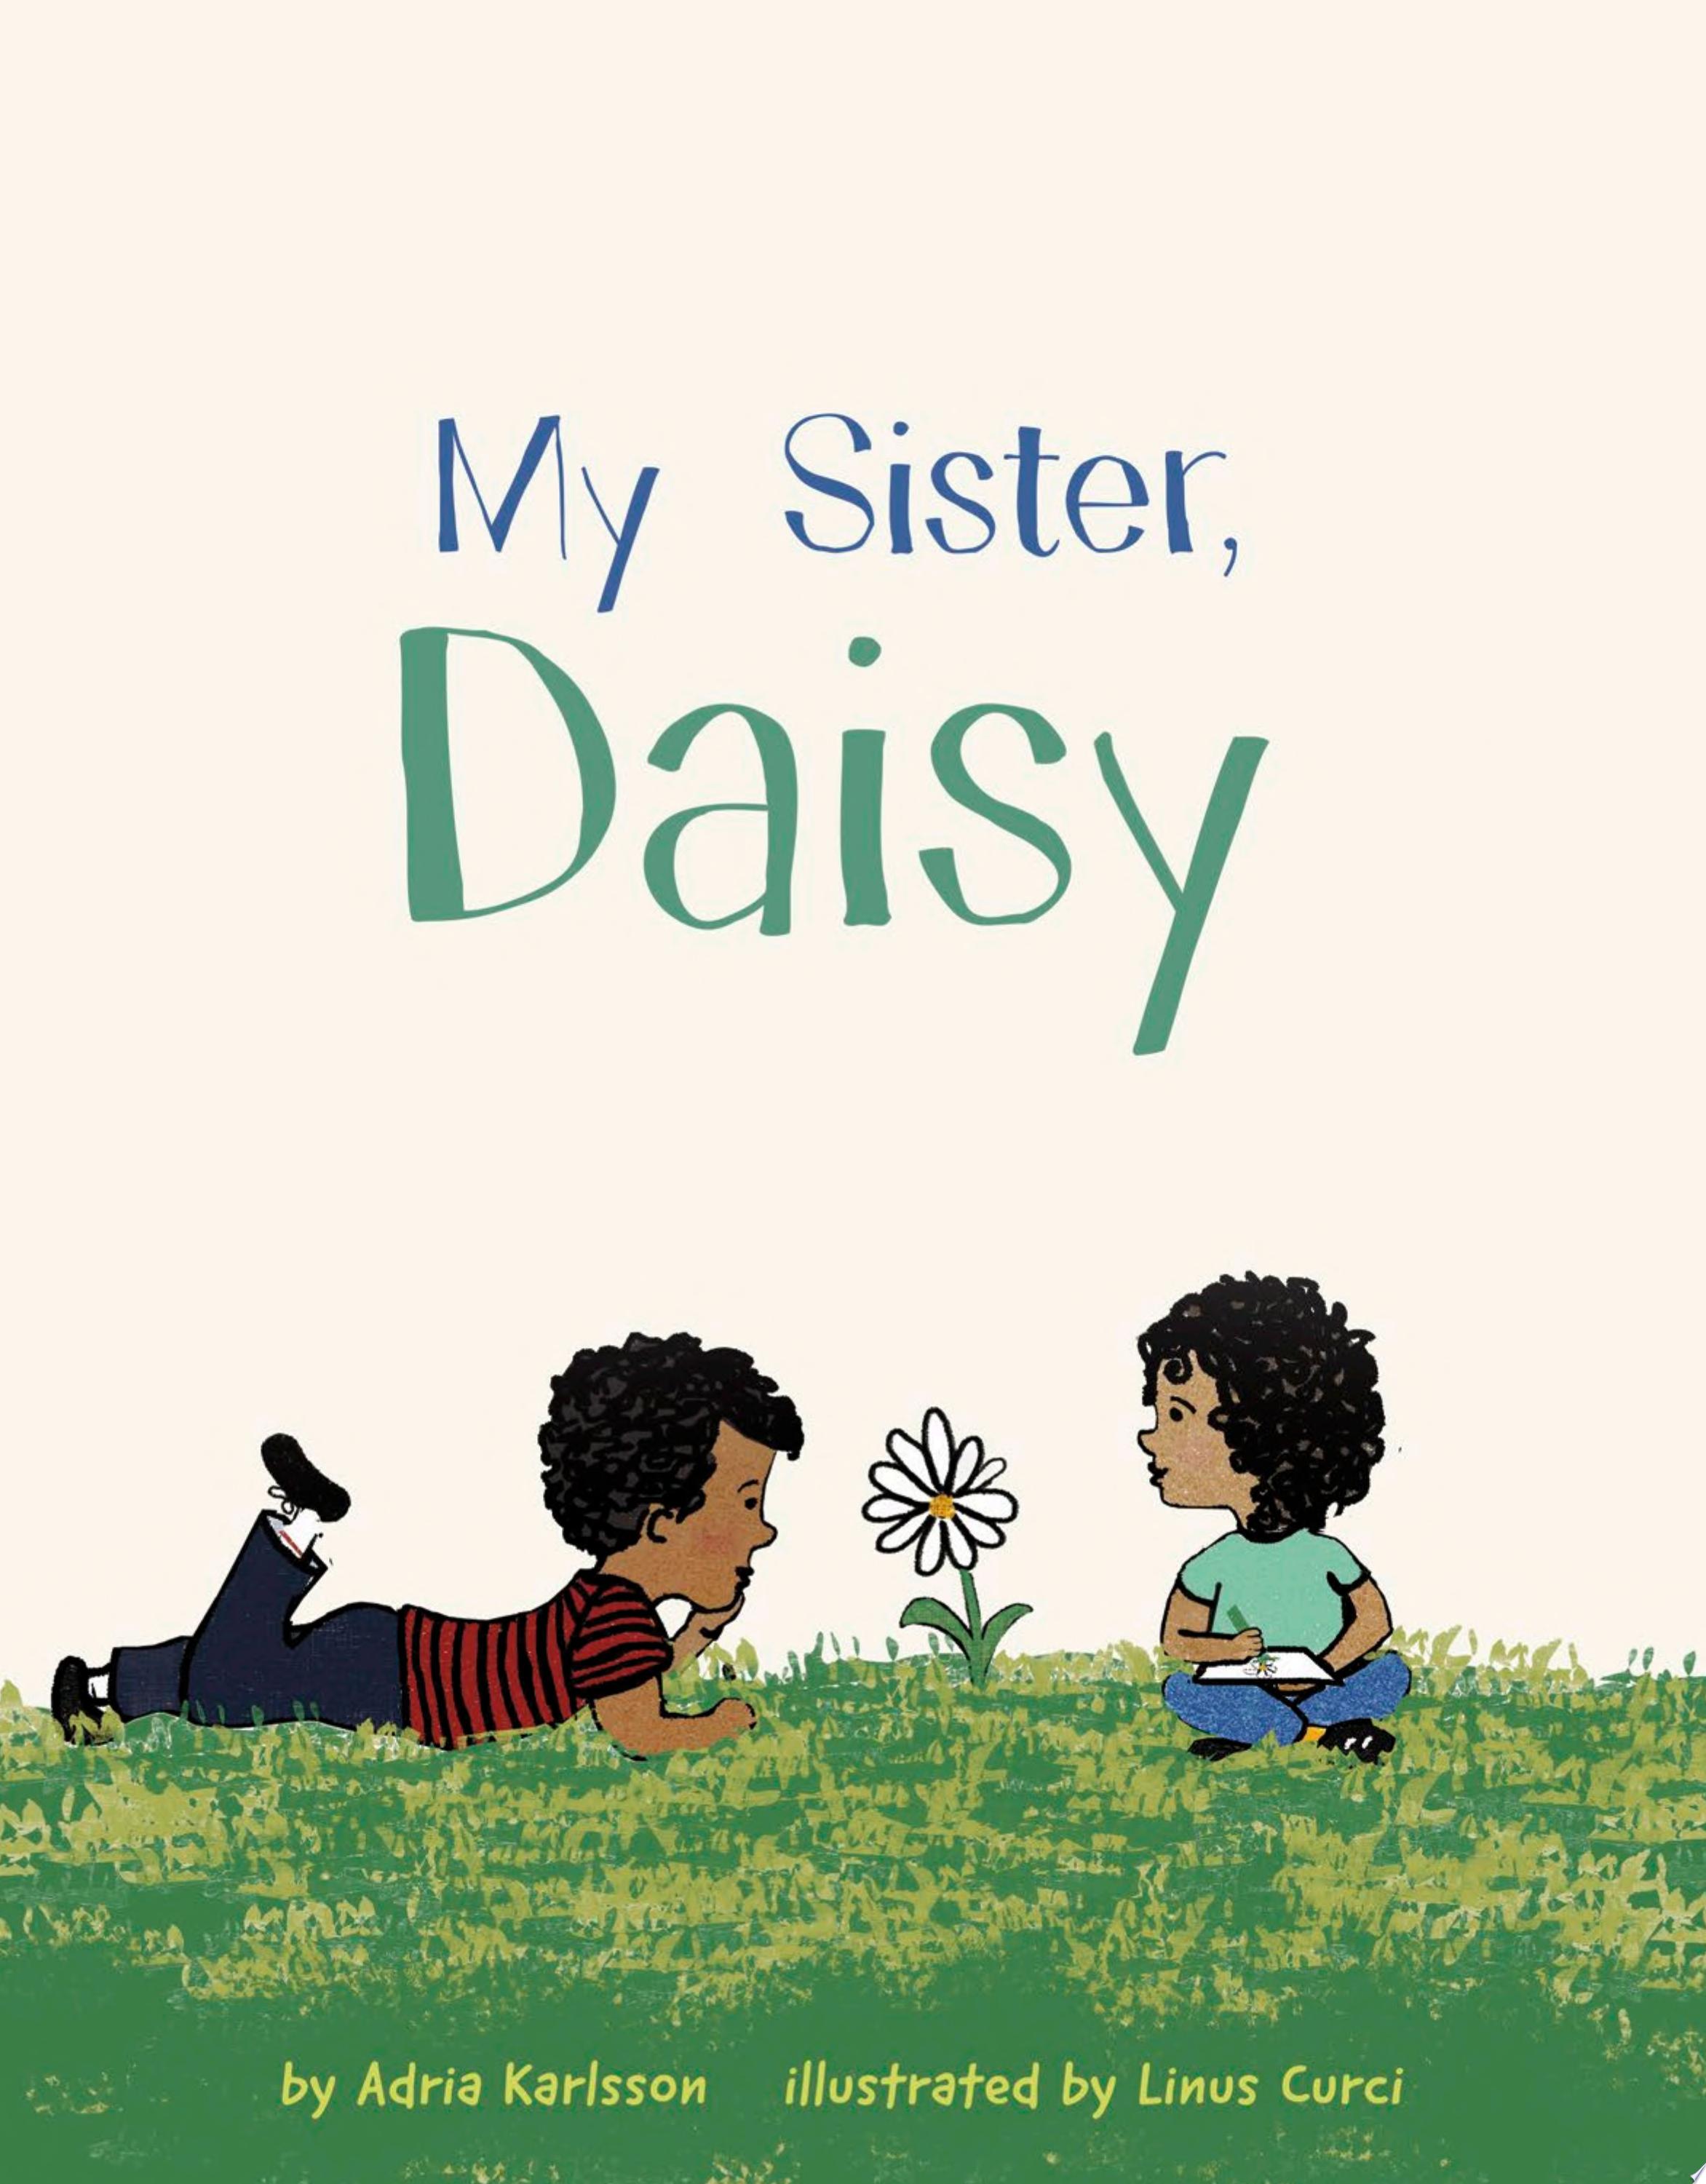 Image for "My Sister, Daisy"